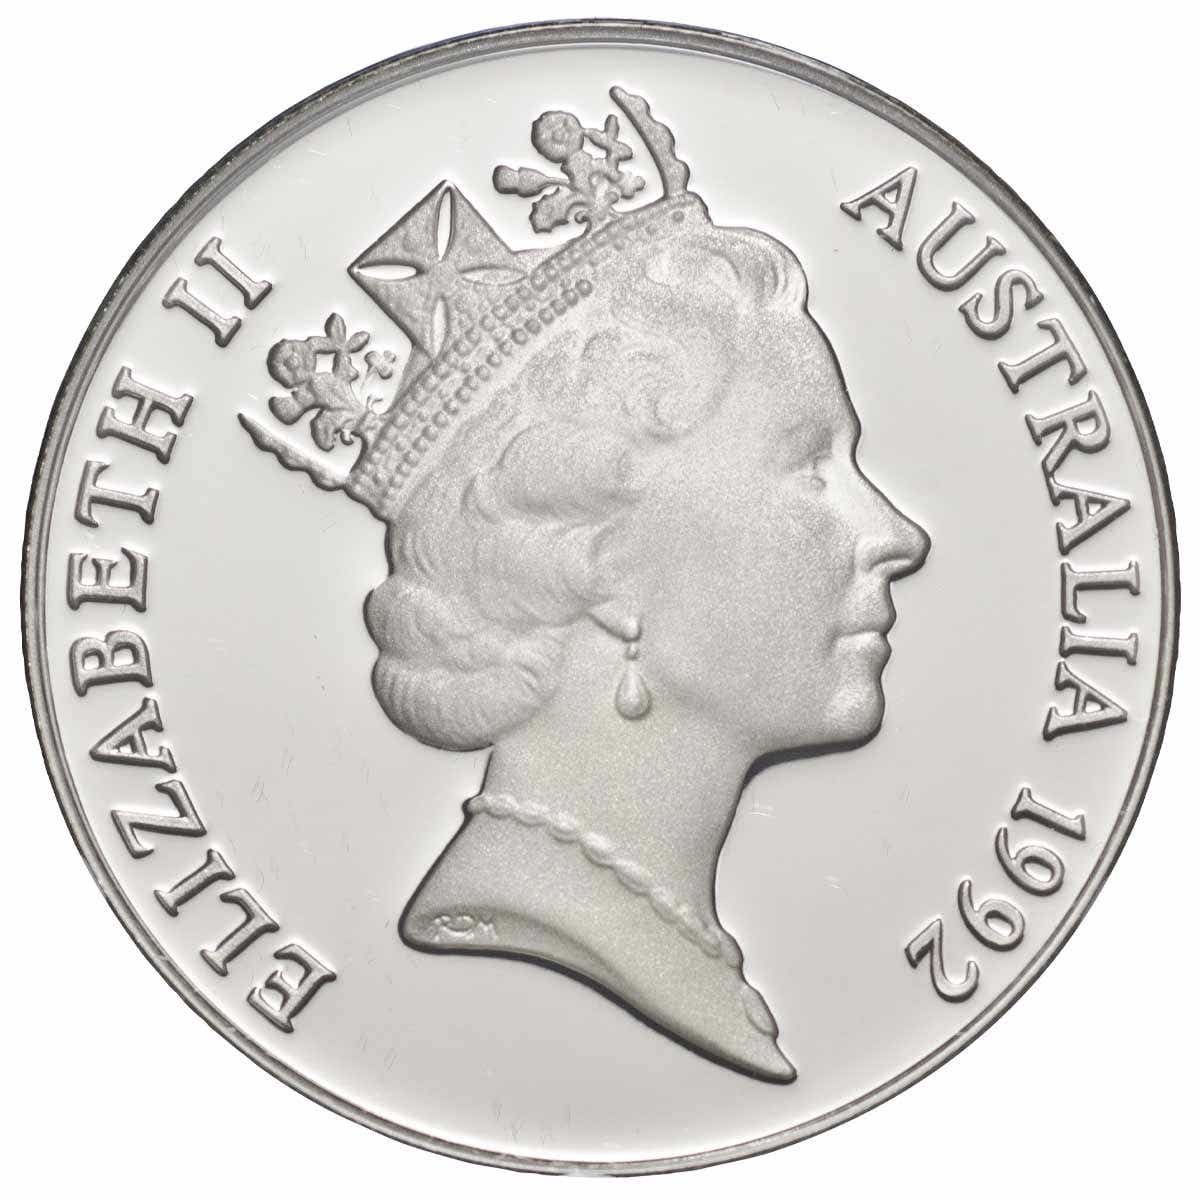 Australia Northern Territory 1992 $10 Silver Proof Coin